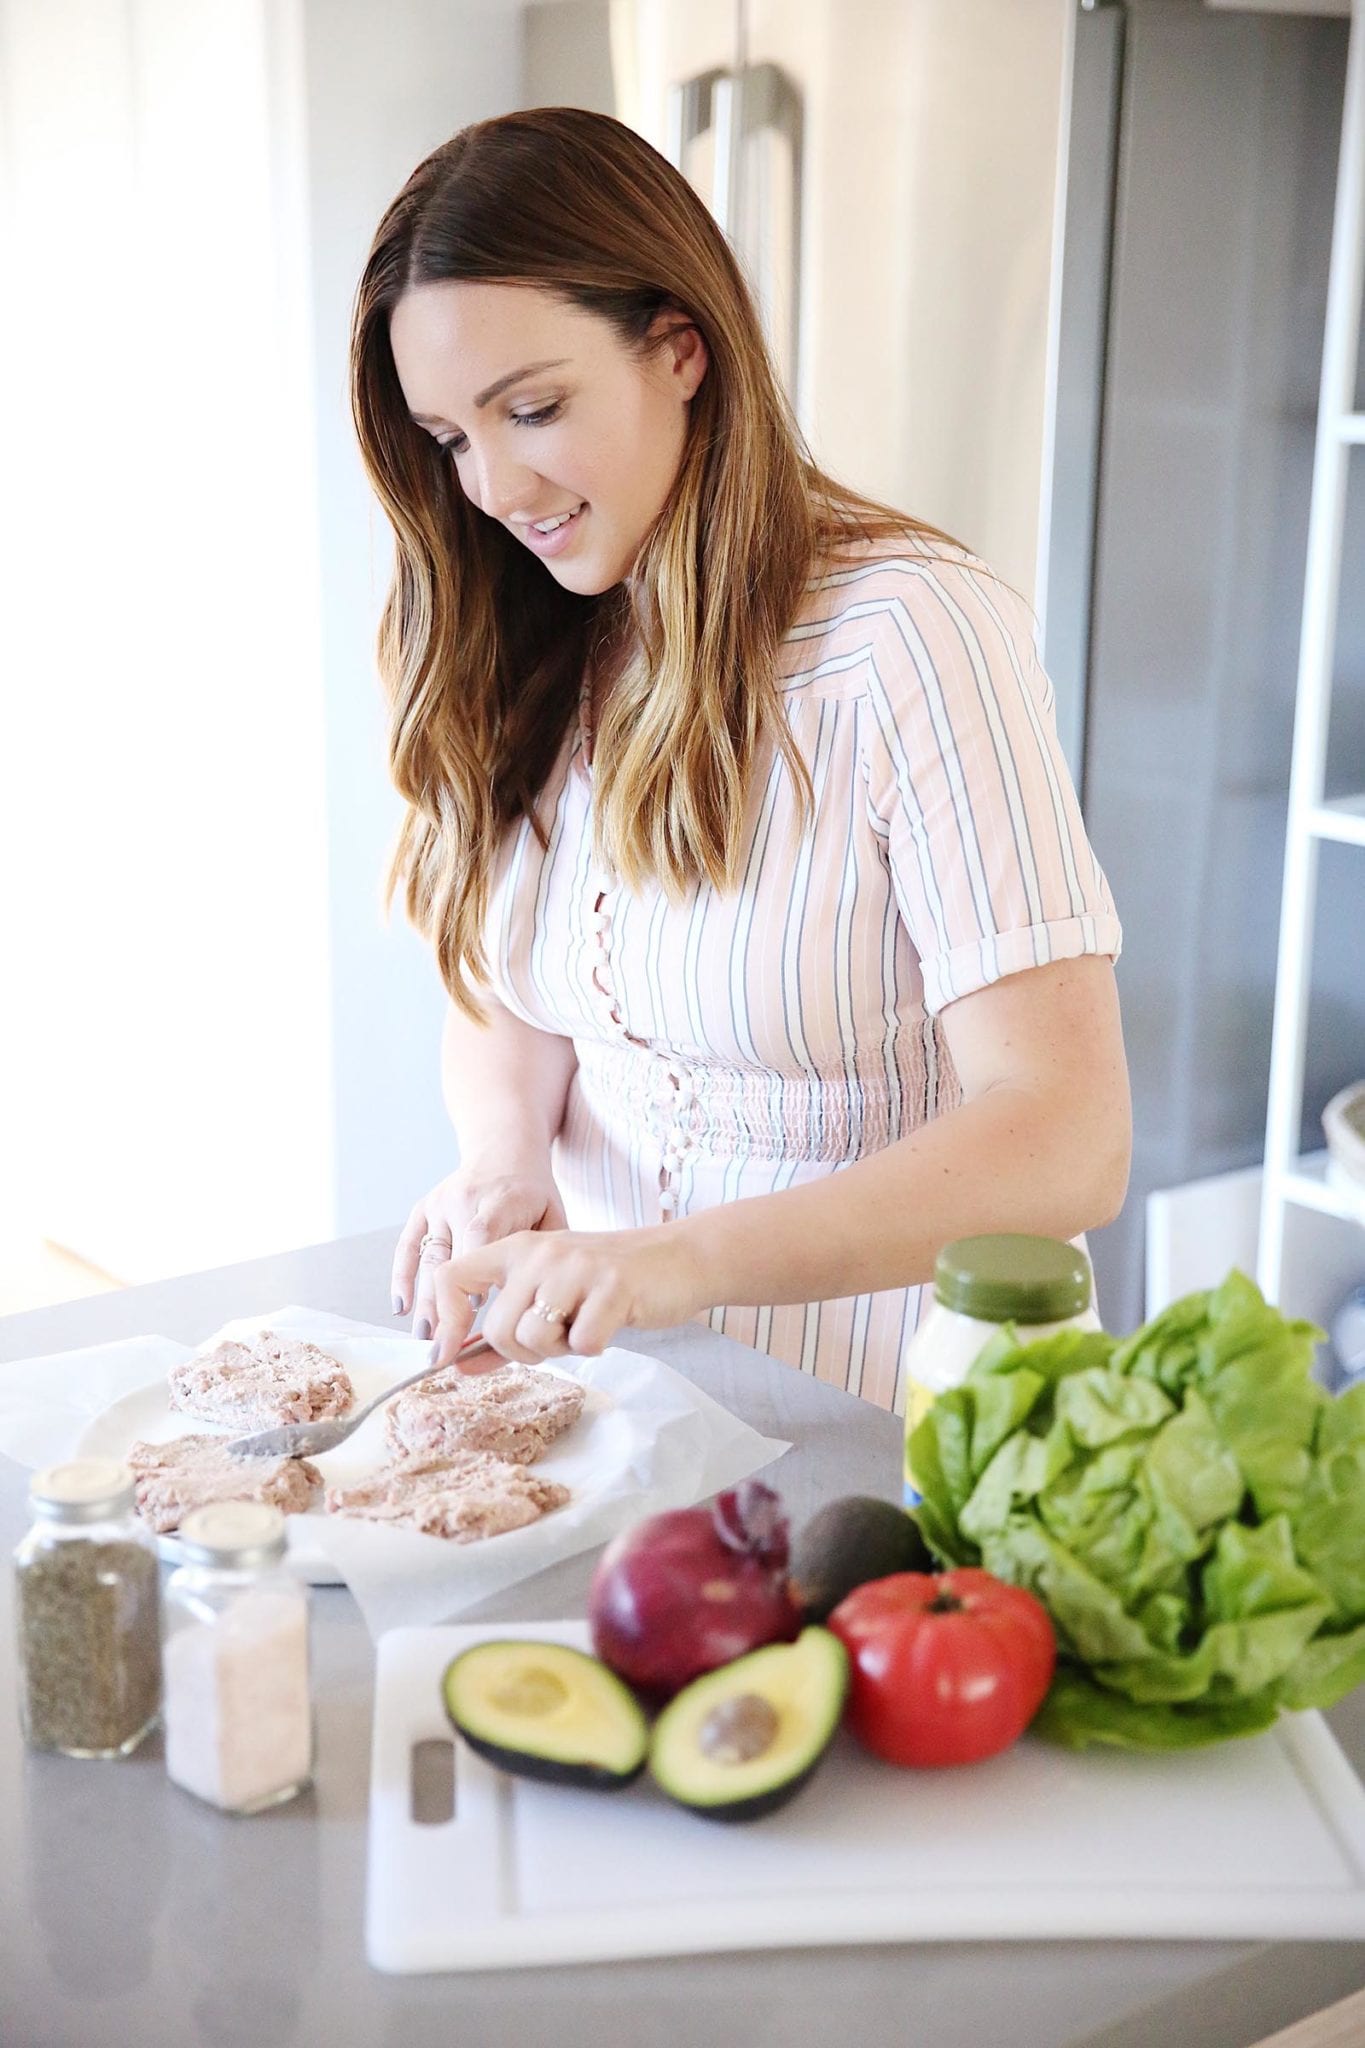 turkey smash burgers recipe featured by popular San Francisco lifestyle blogger, Just Add Glam